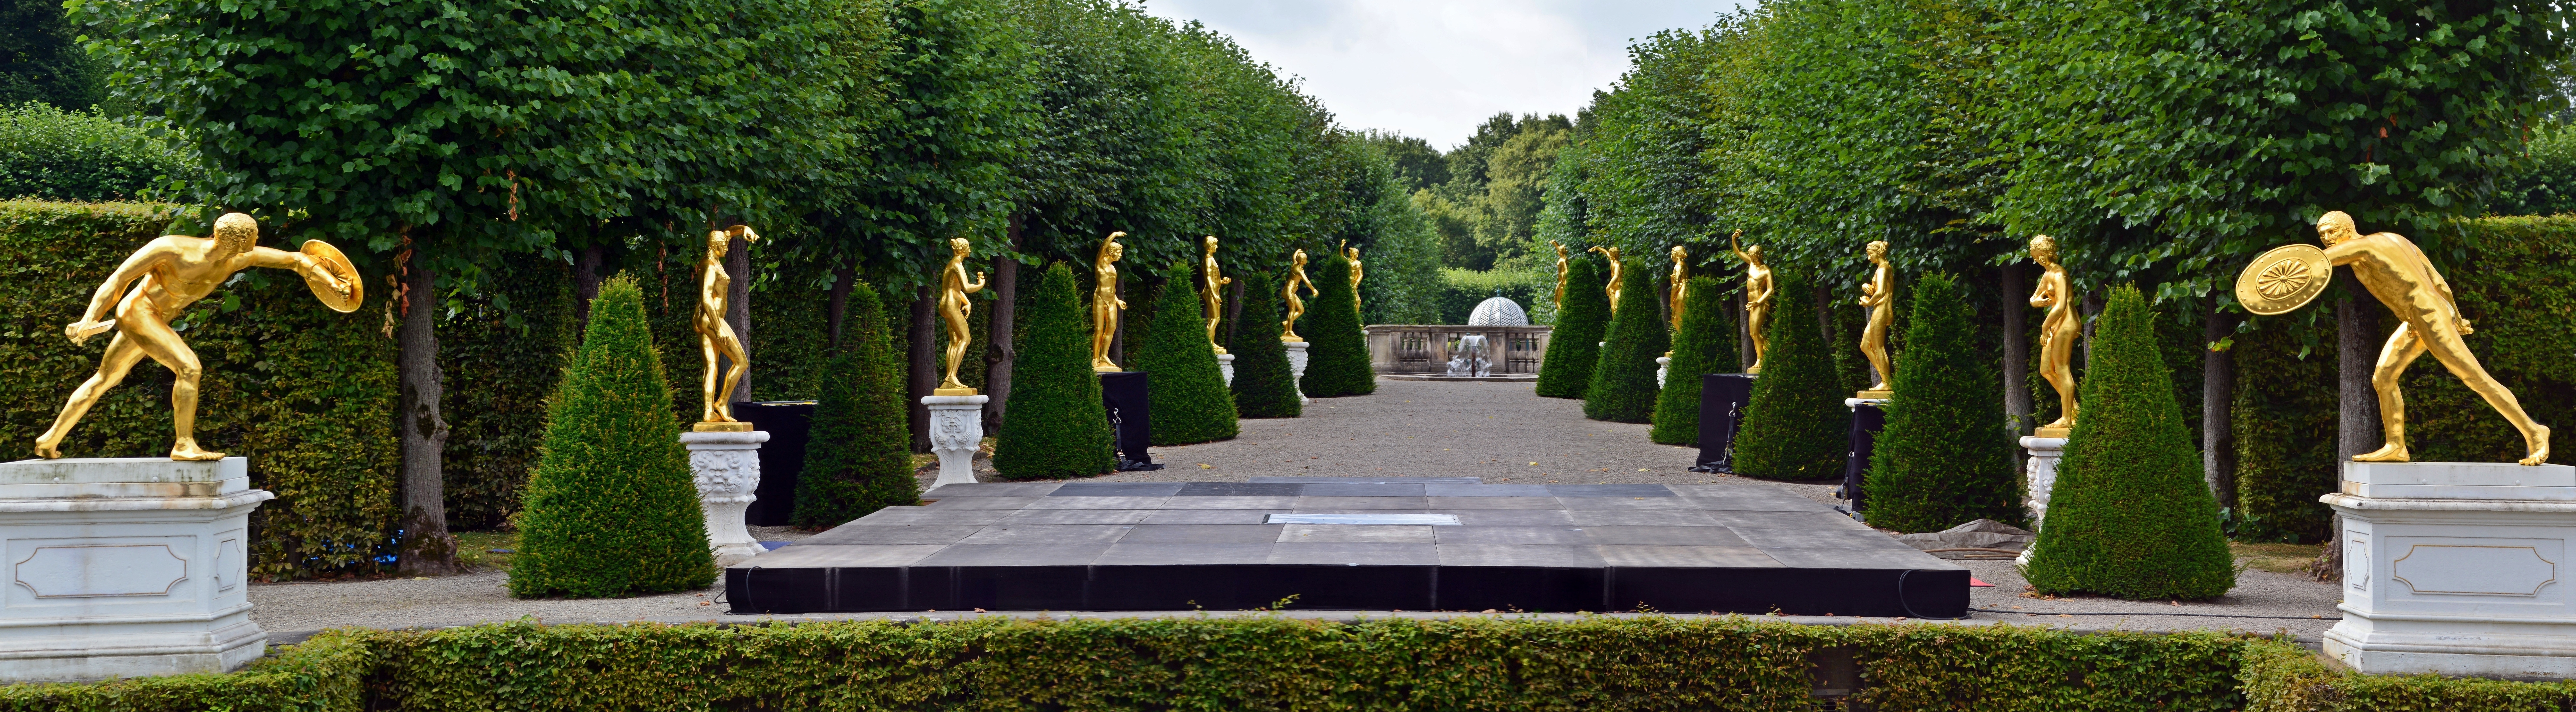 green cone shaped bushes with man gold staTUES